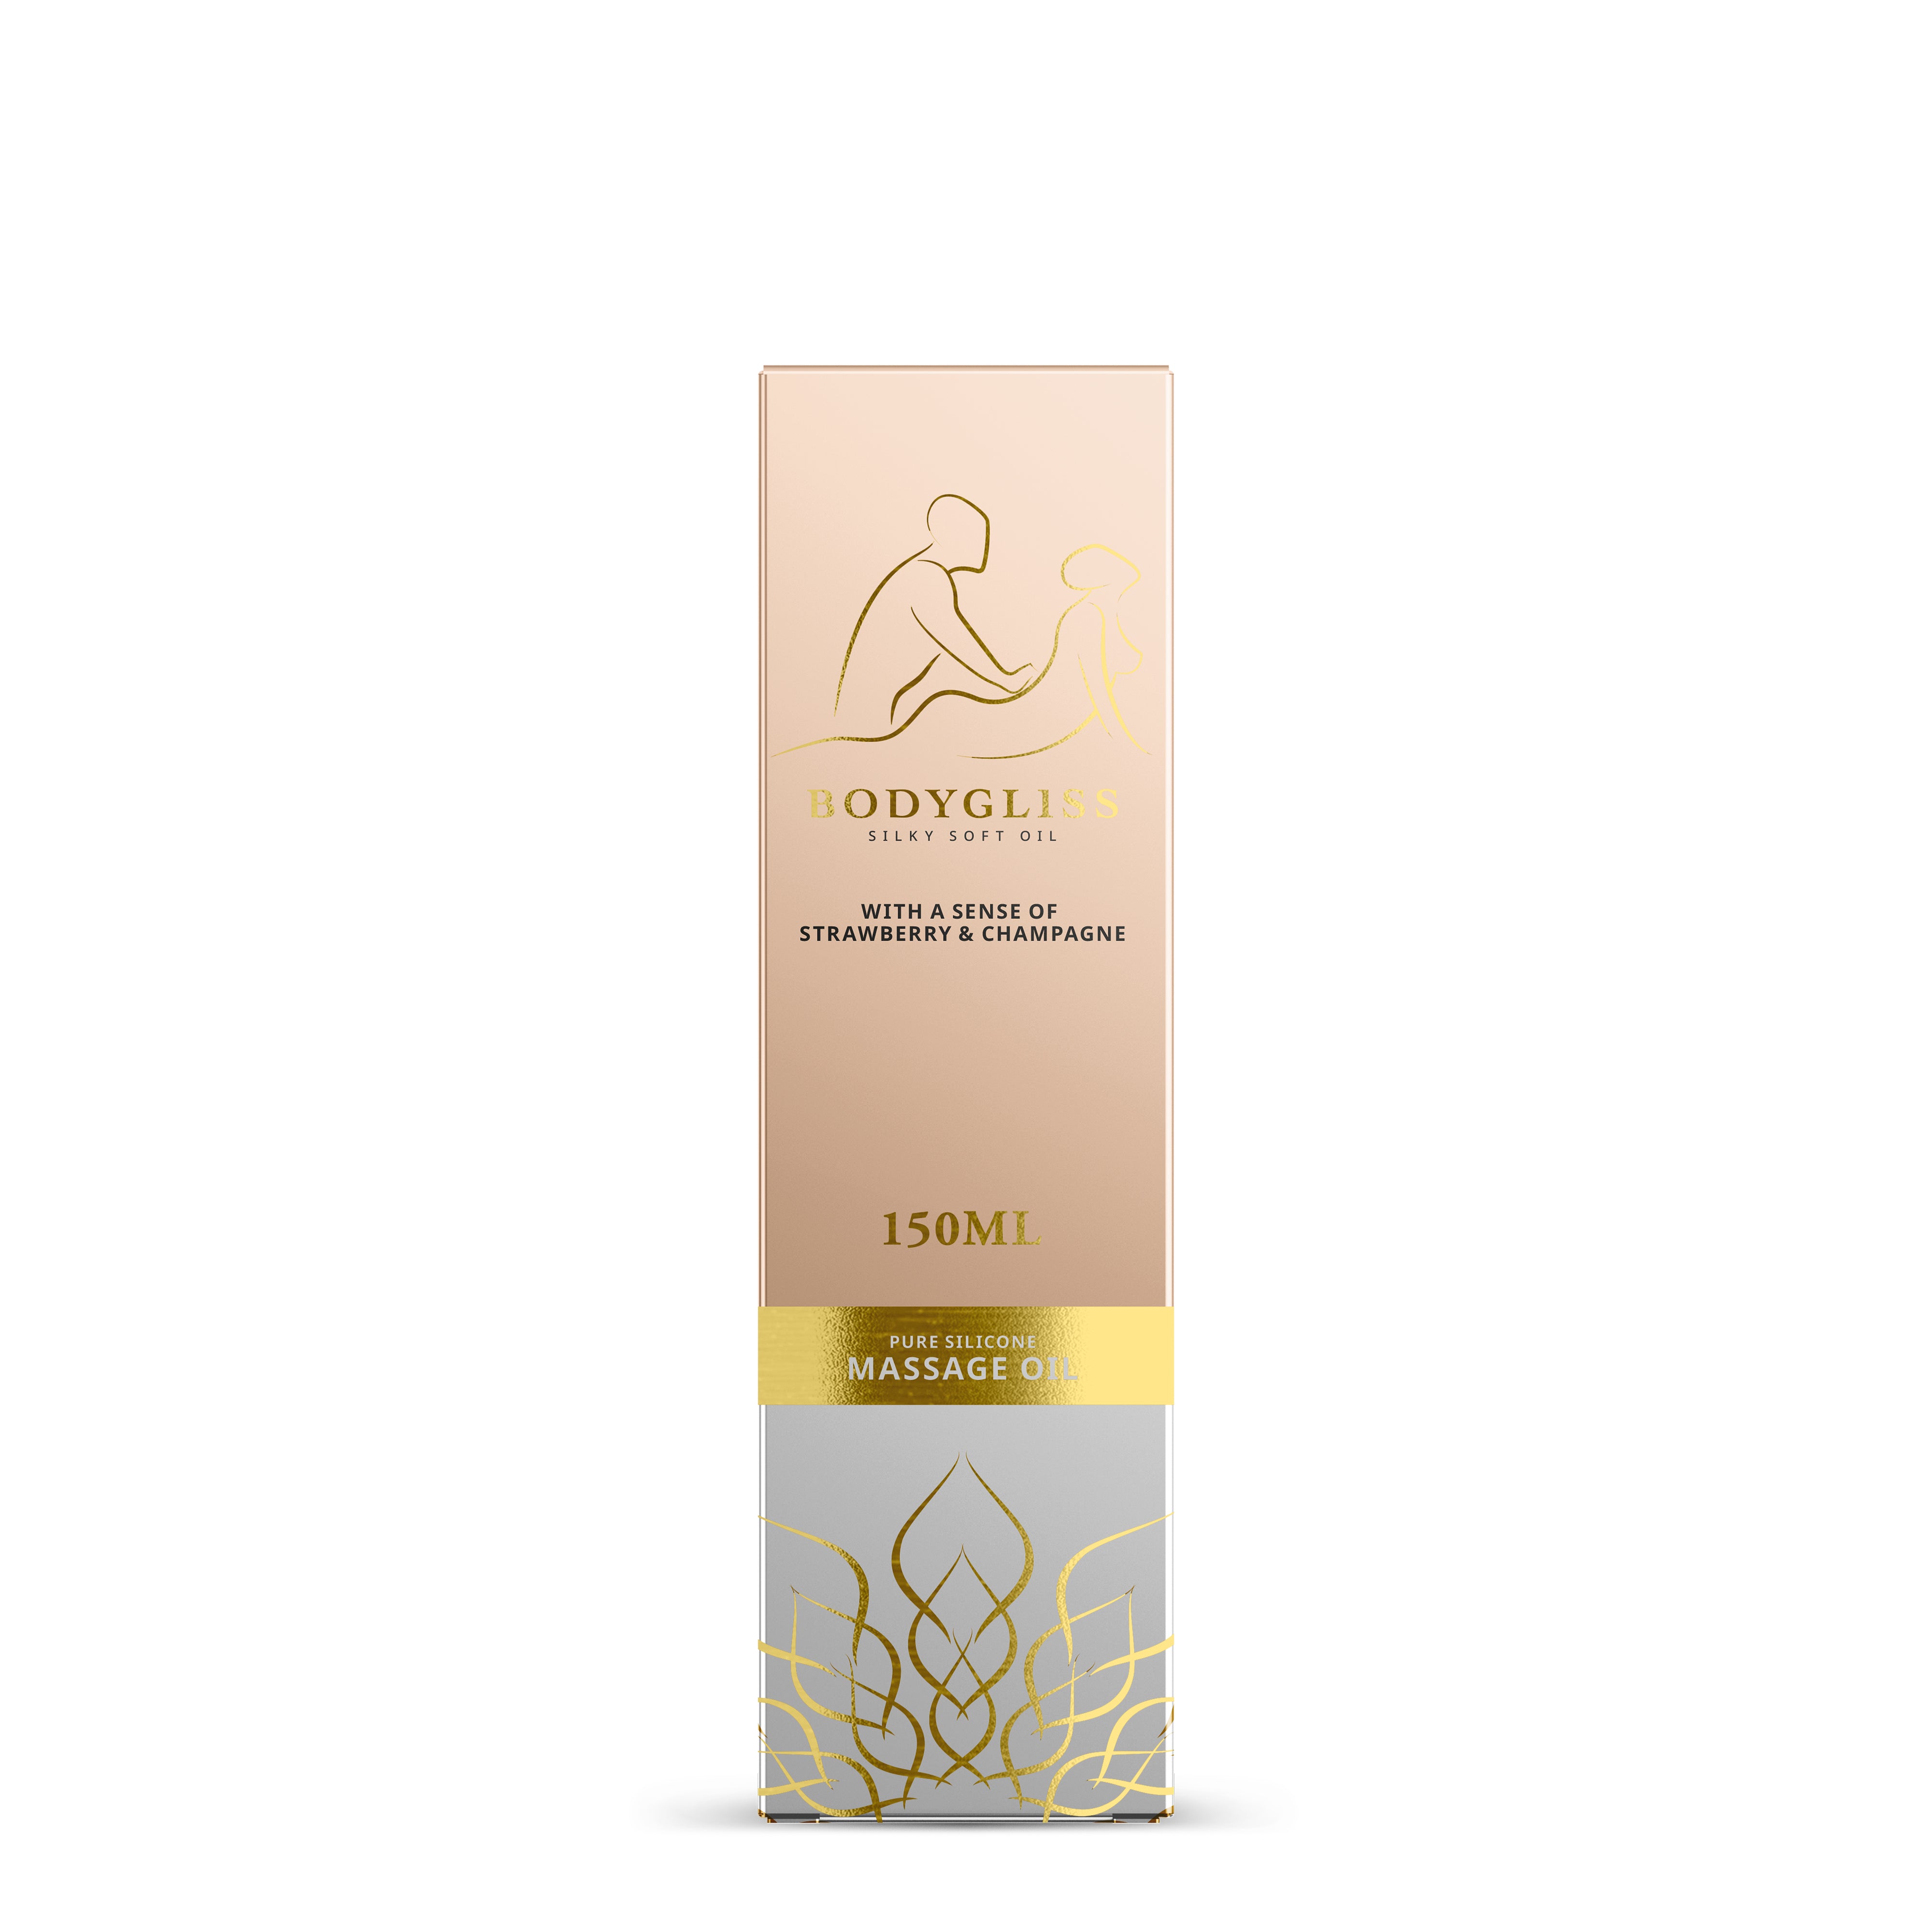 Bodygliss Massage Collection Silky Soft Olie Aardbei & Champagne 150ml